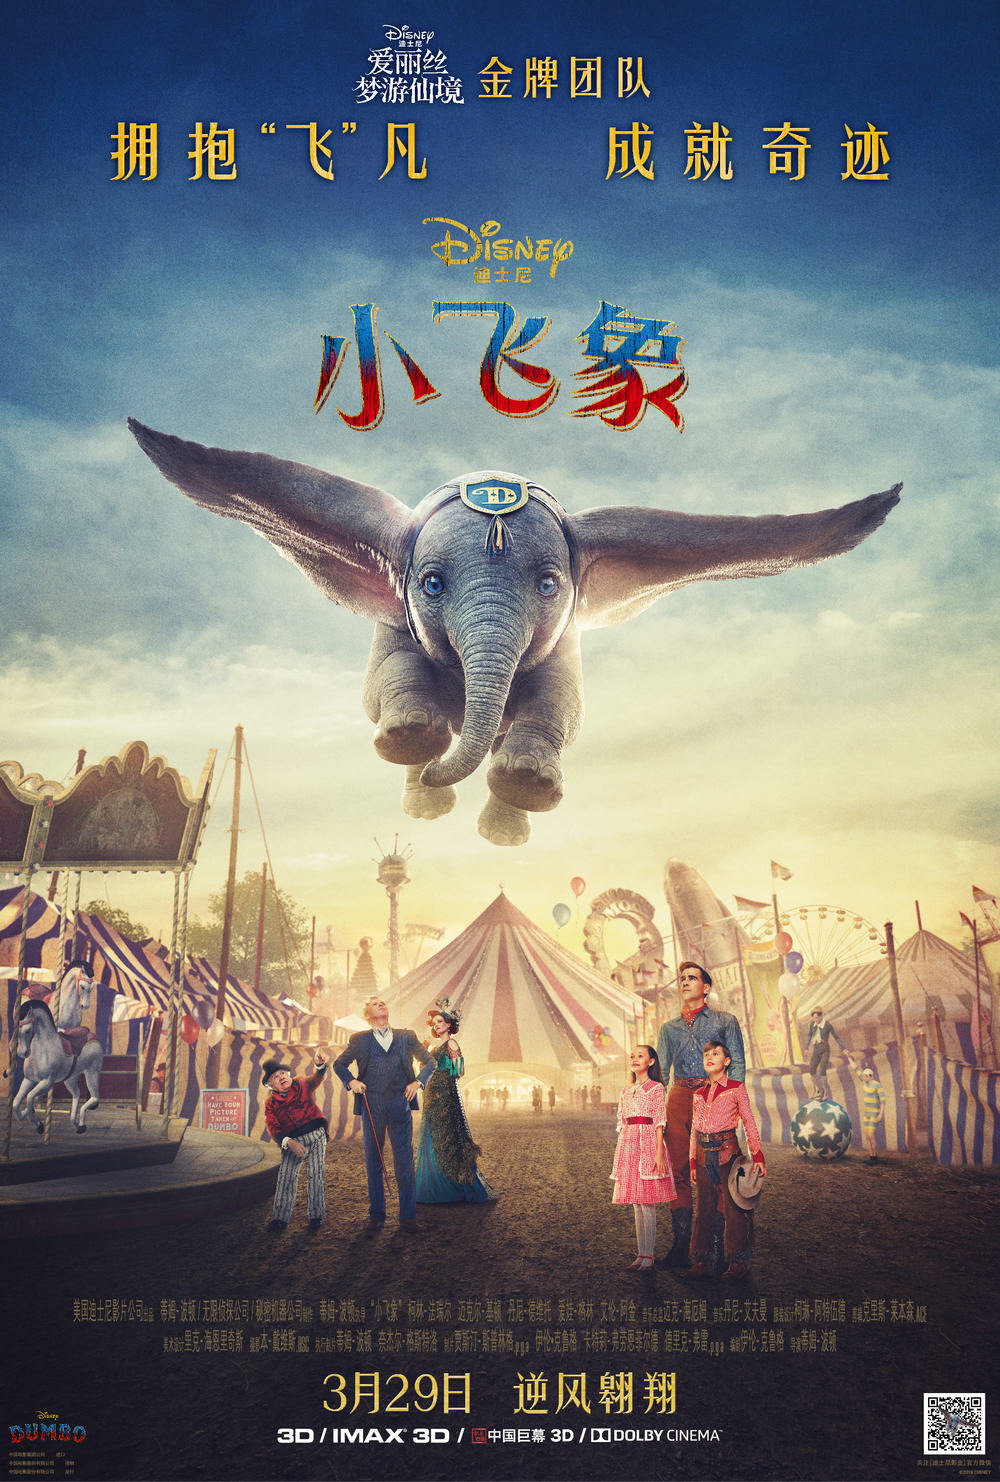 Extra Large Movie Poster Image for Dumbo (#15 of 21)